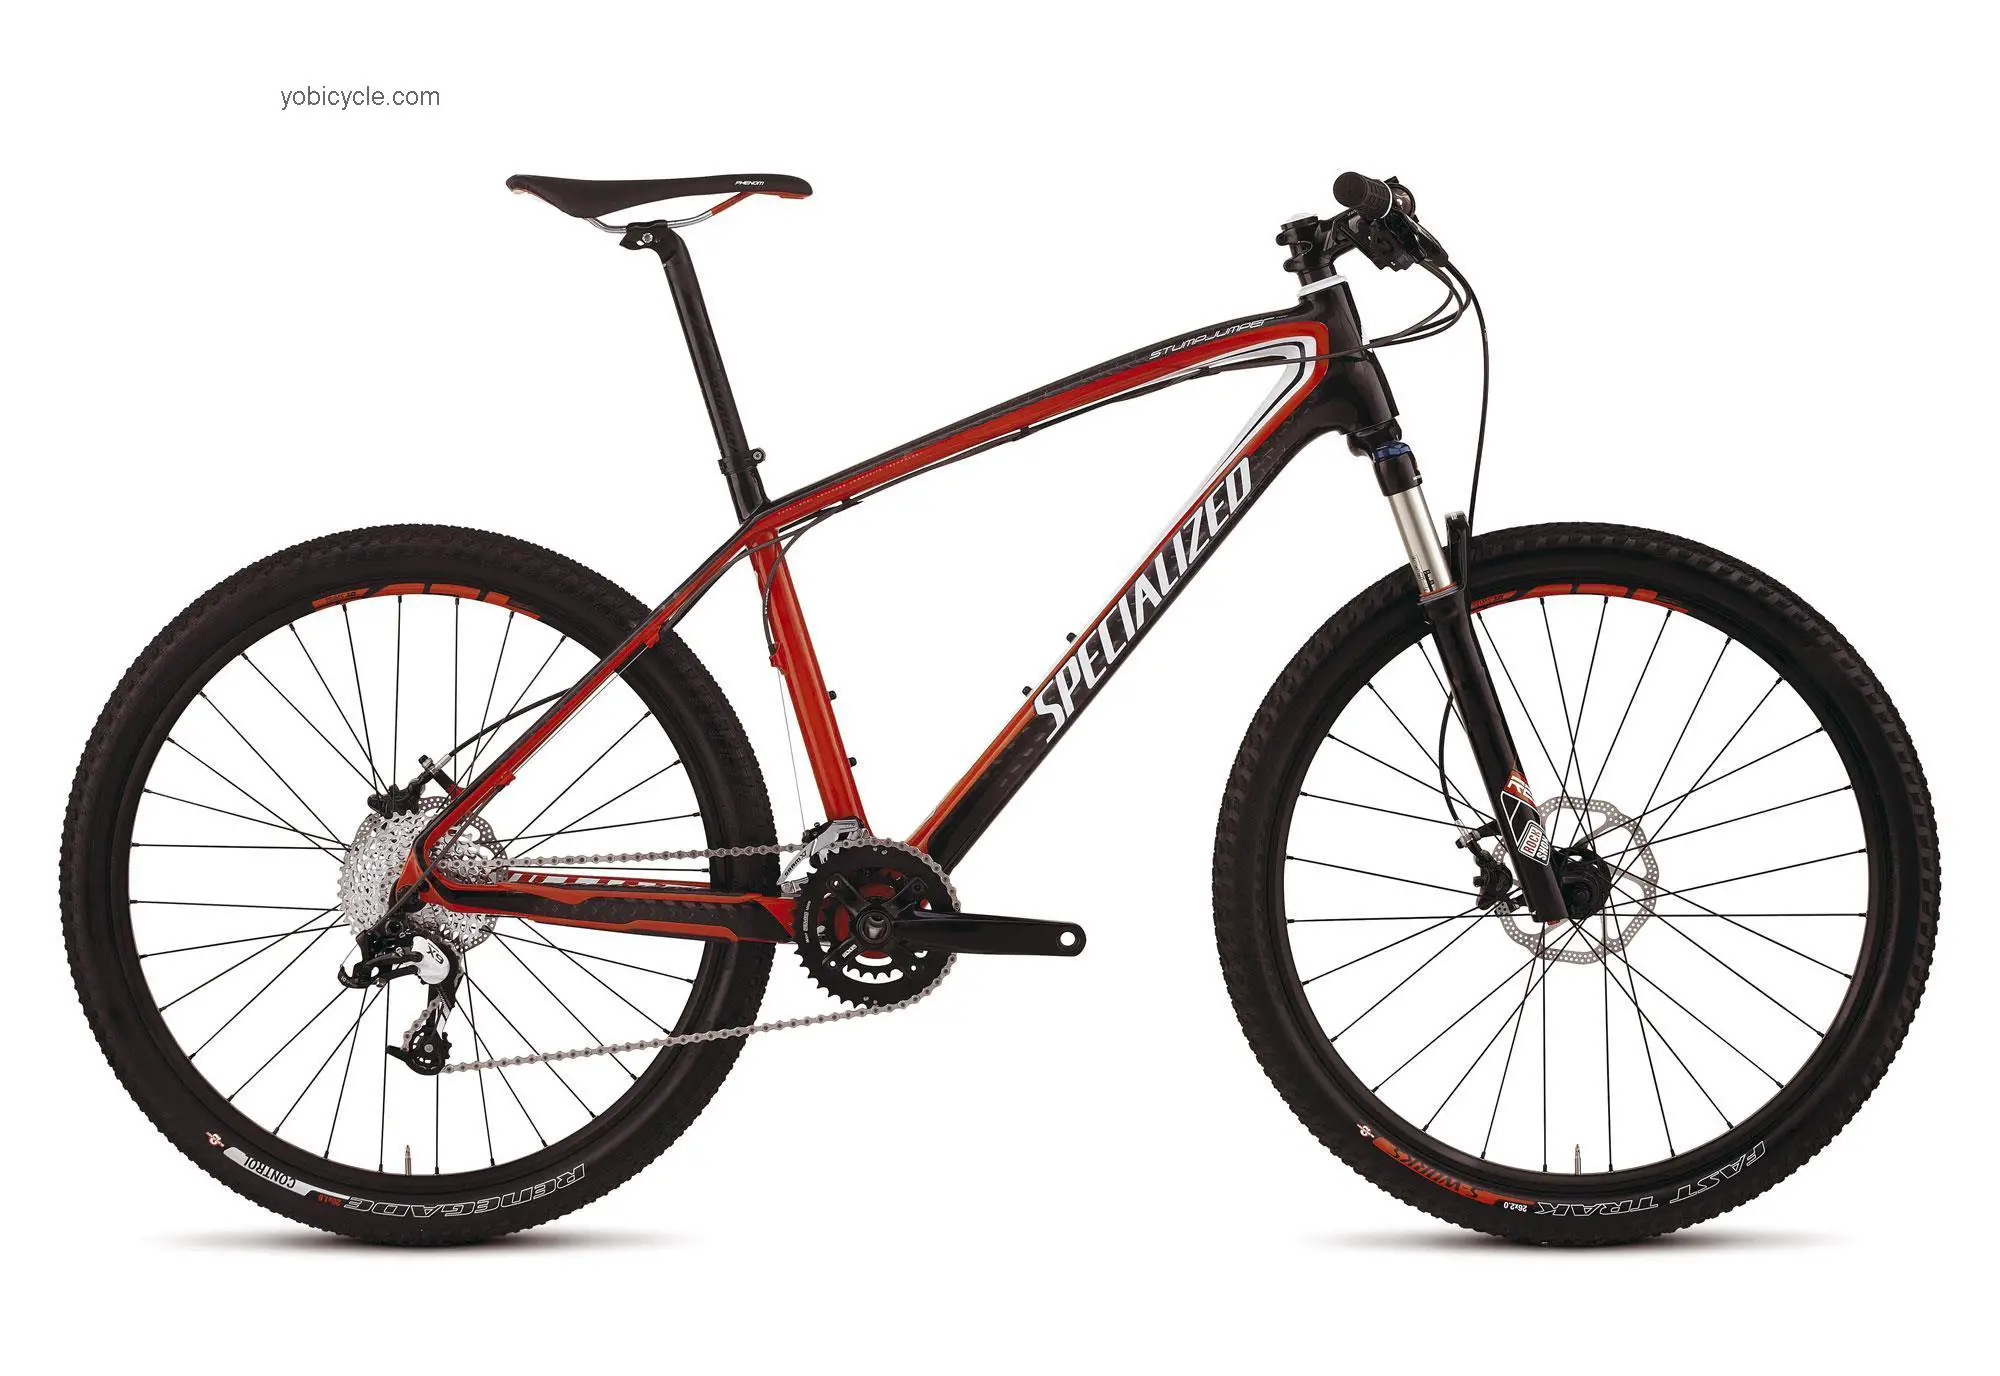 Specialized Stumpjumper HT Comp Carbon competitors and comparison tool online specs and performance